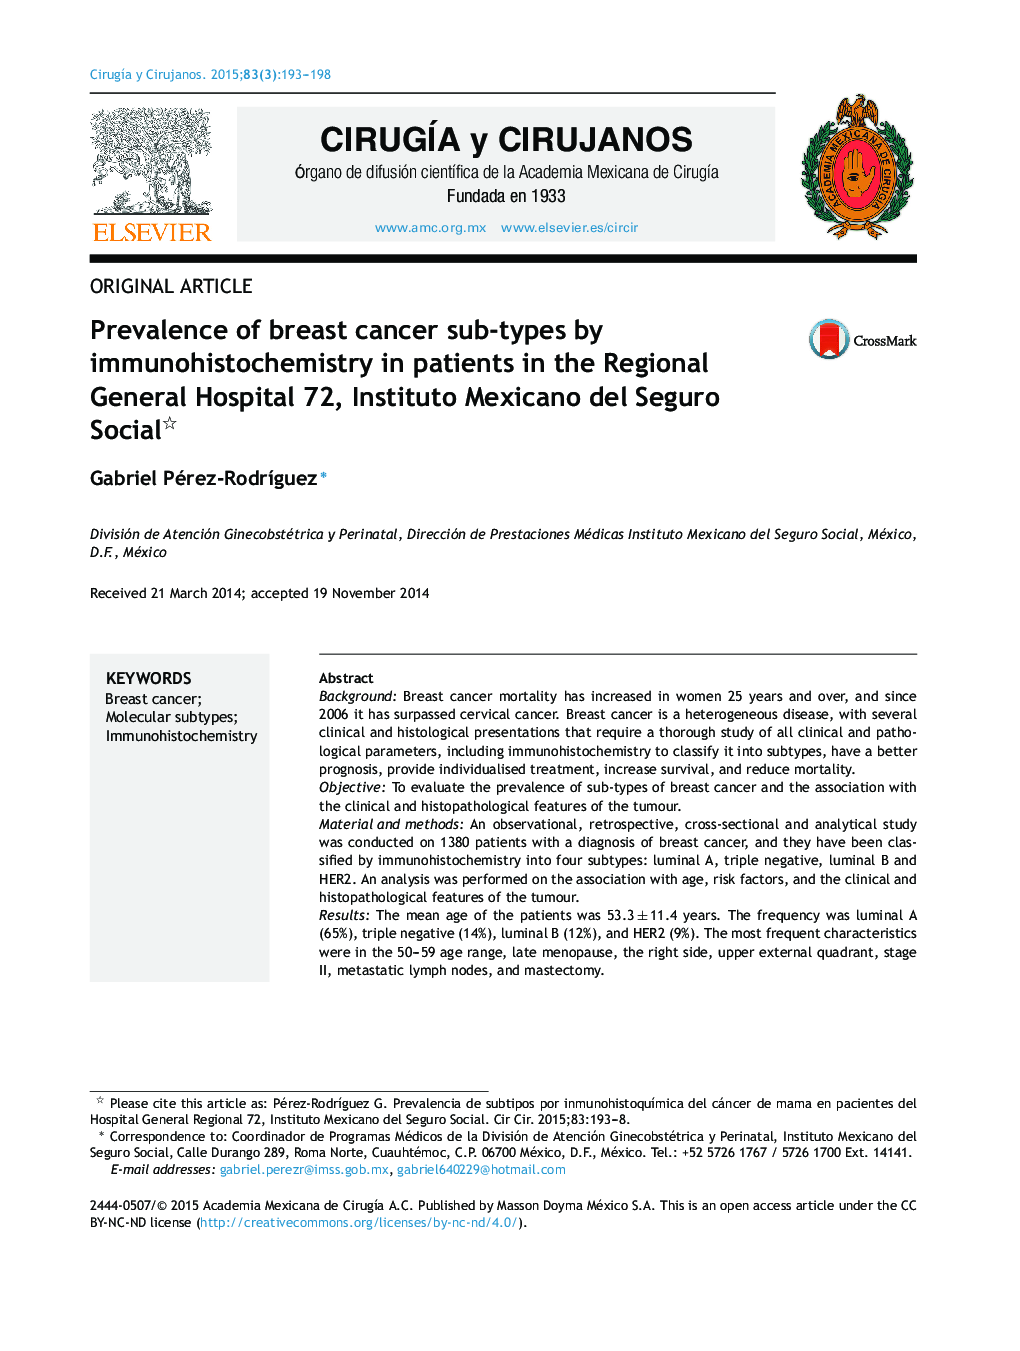 Prevalence of breast cancer sub-types by immunohistochemistry in patients in the Regional General Hospital 72, Instituto Mexicano del Seguro Social 